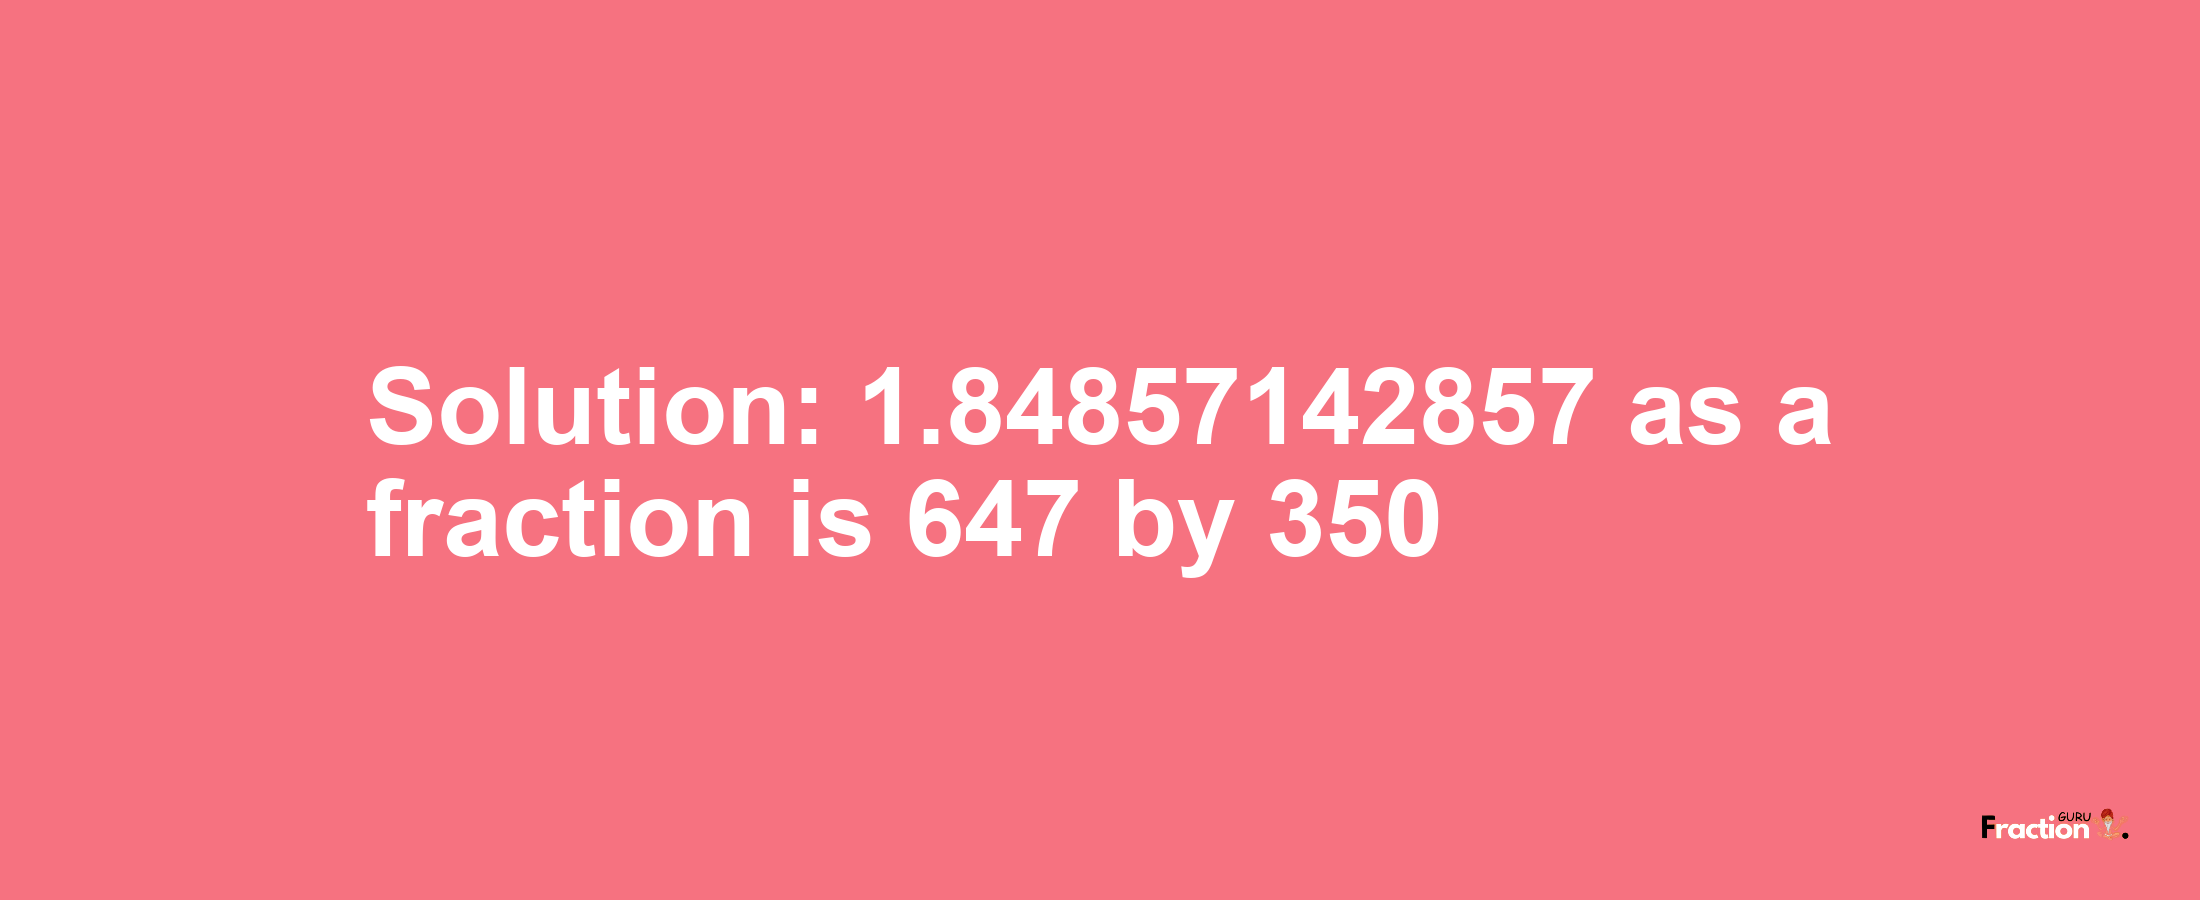 Solution:1.84857142857 as a fraction is 647/350